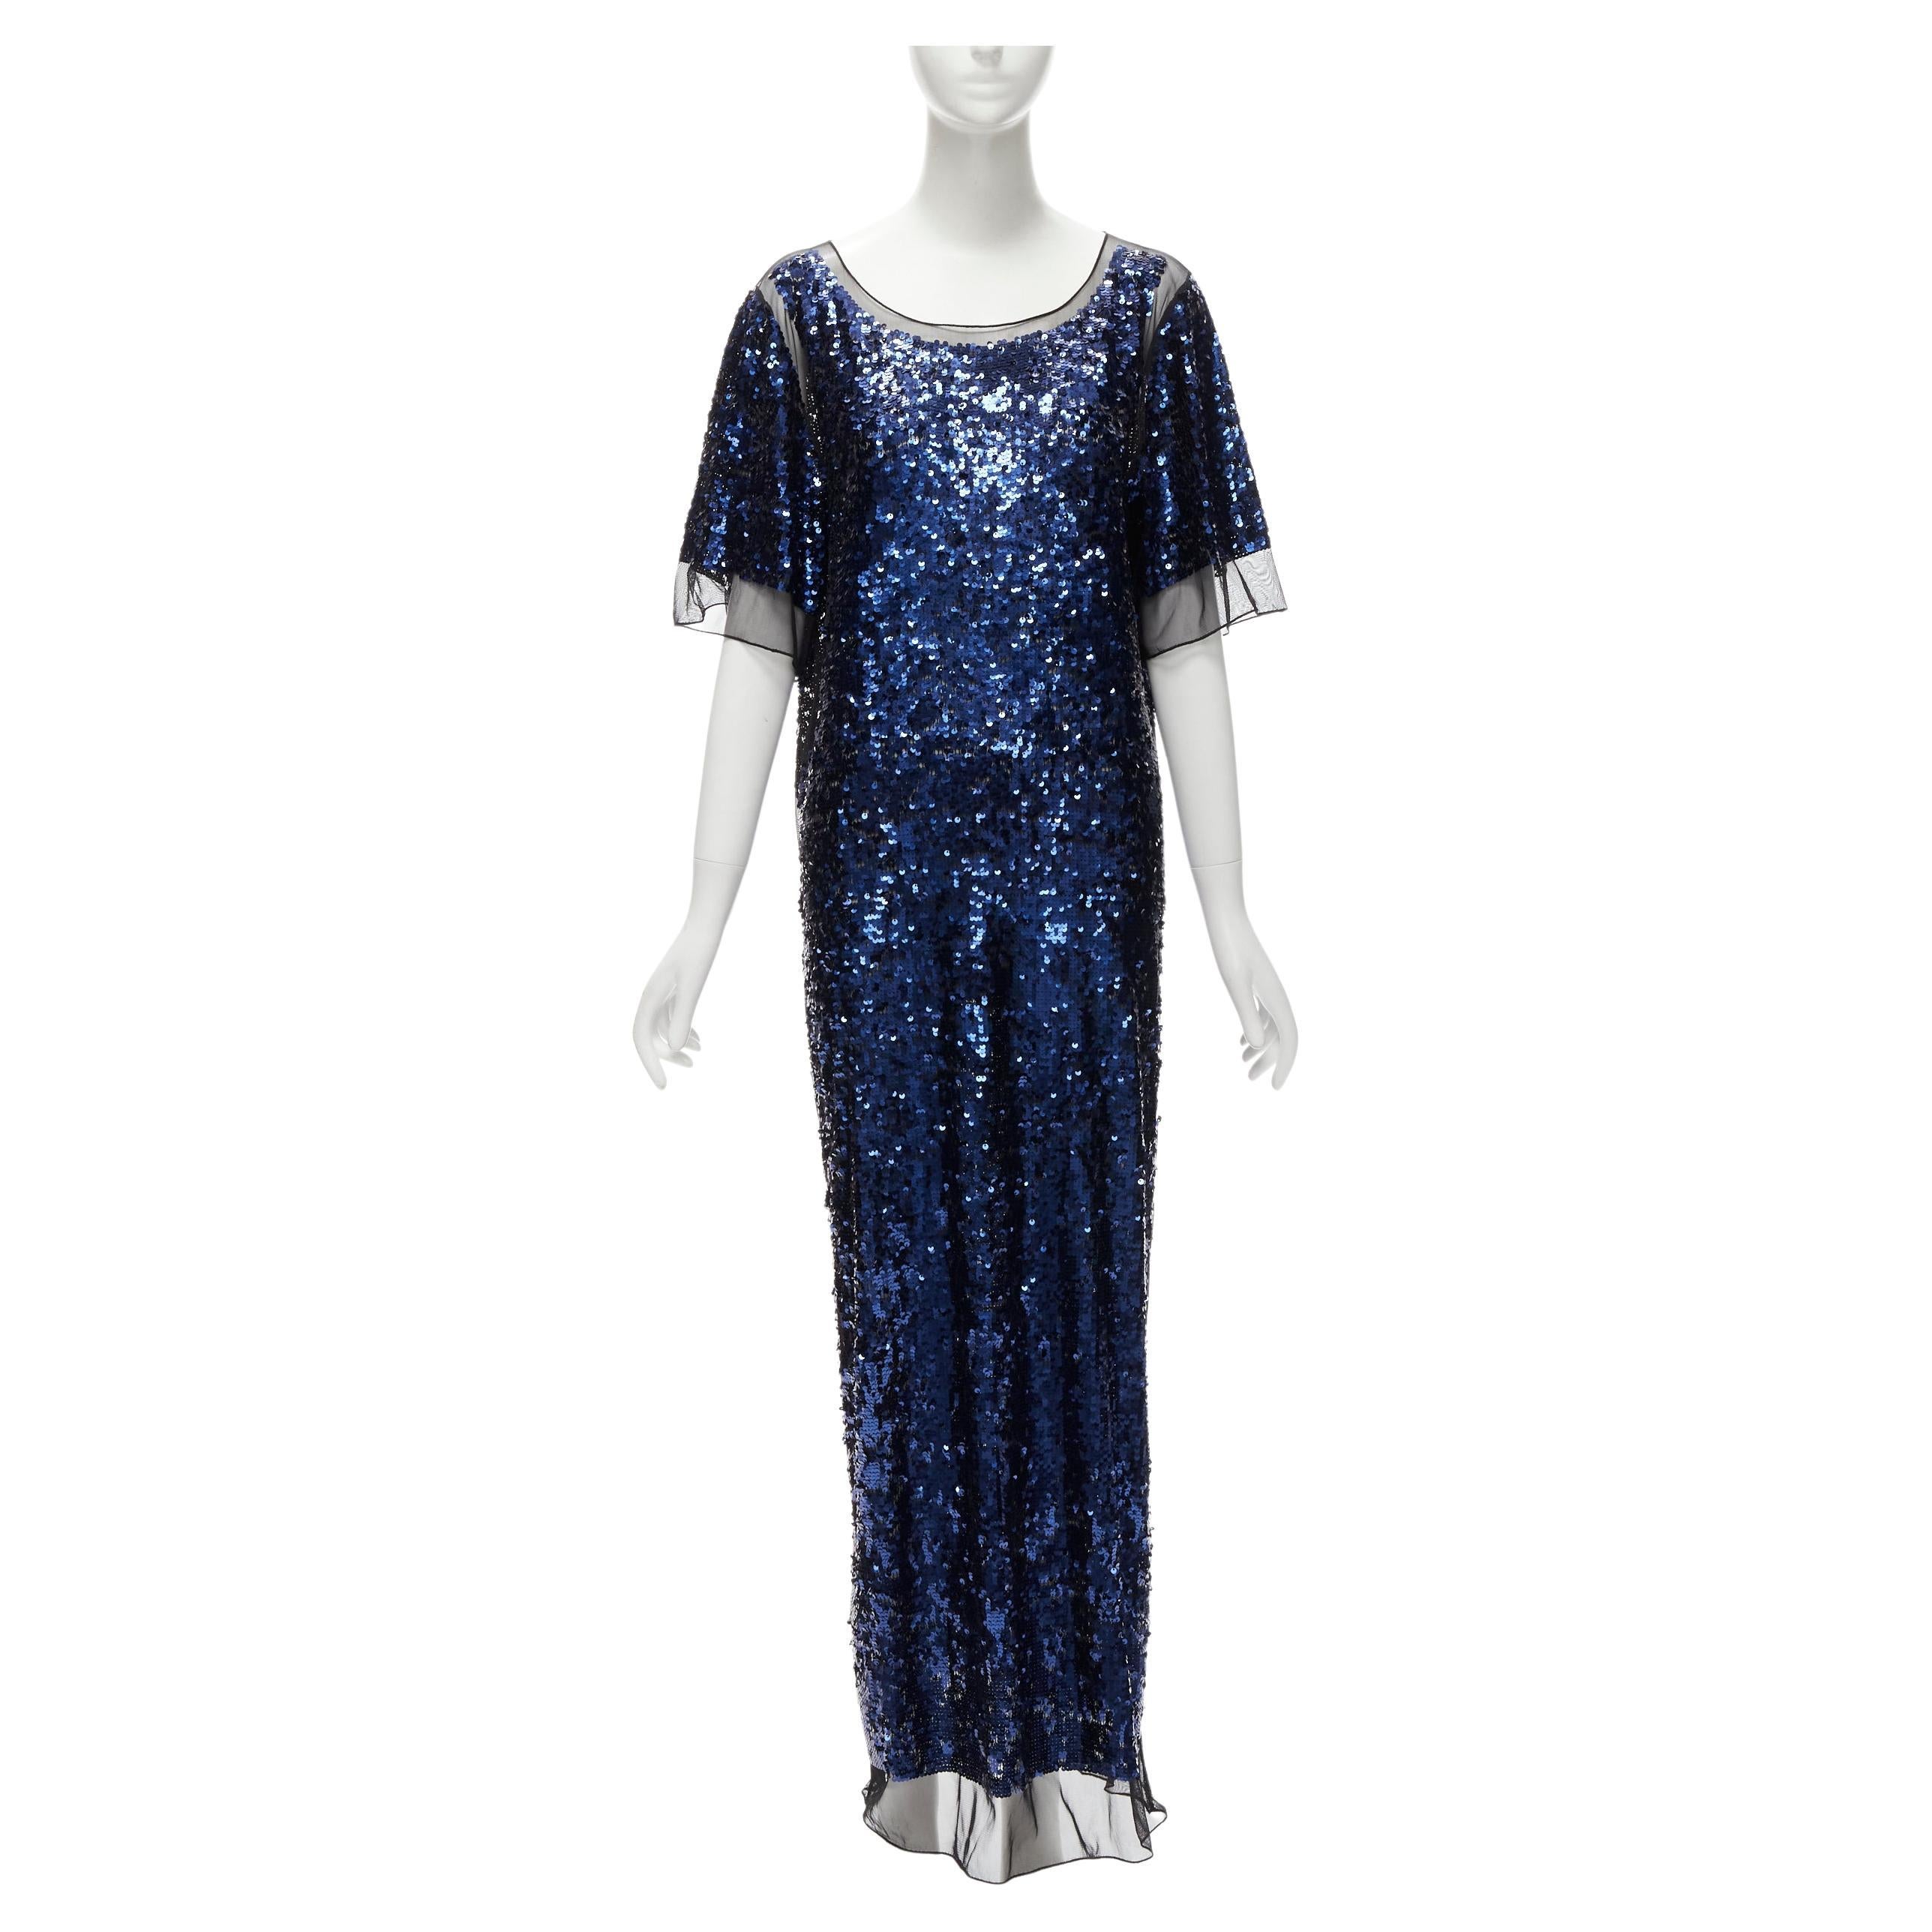 BY MALENE BIRGER blue sequins overlay black sheer evening gown dress M For Sale